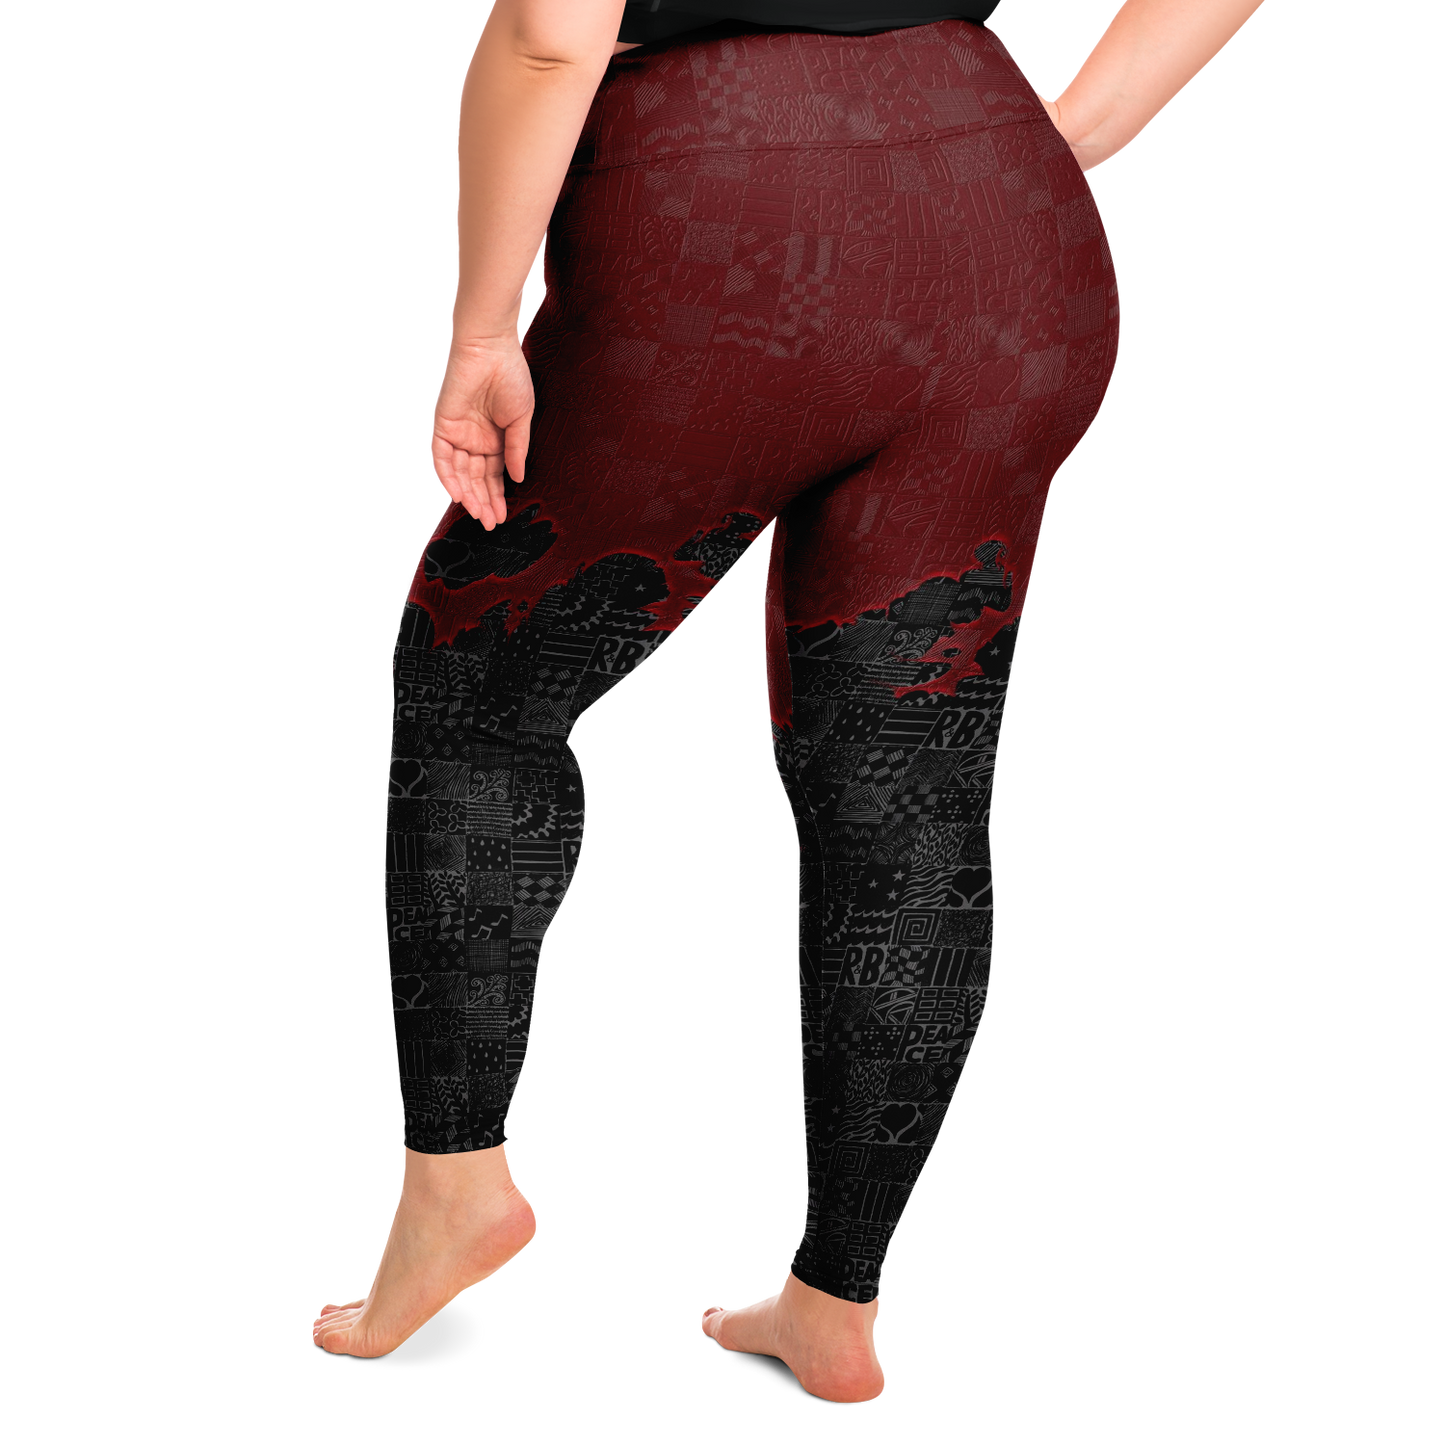 Goth Plus Size Leggings, Ruby freehand doodle style - NeoSkull